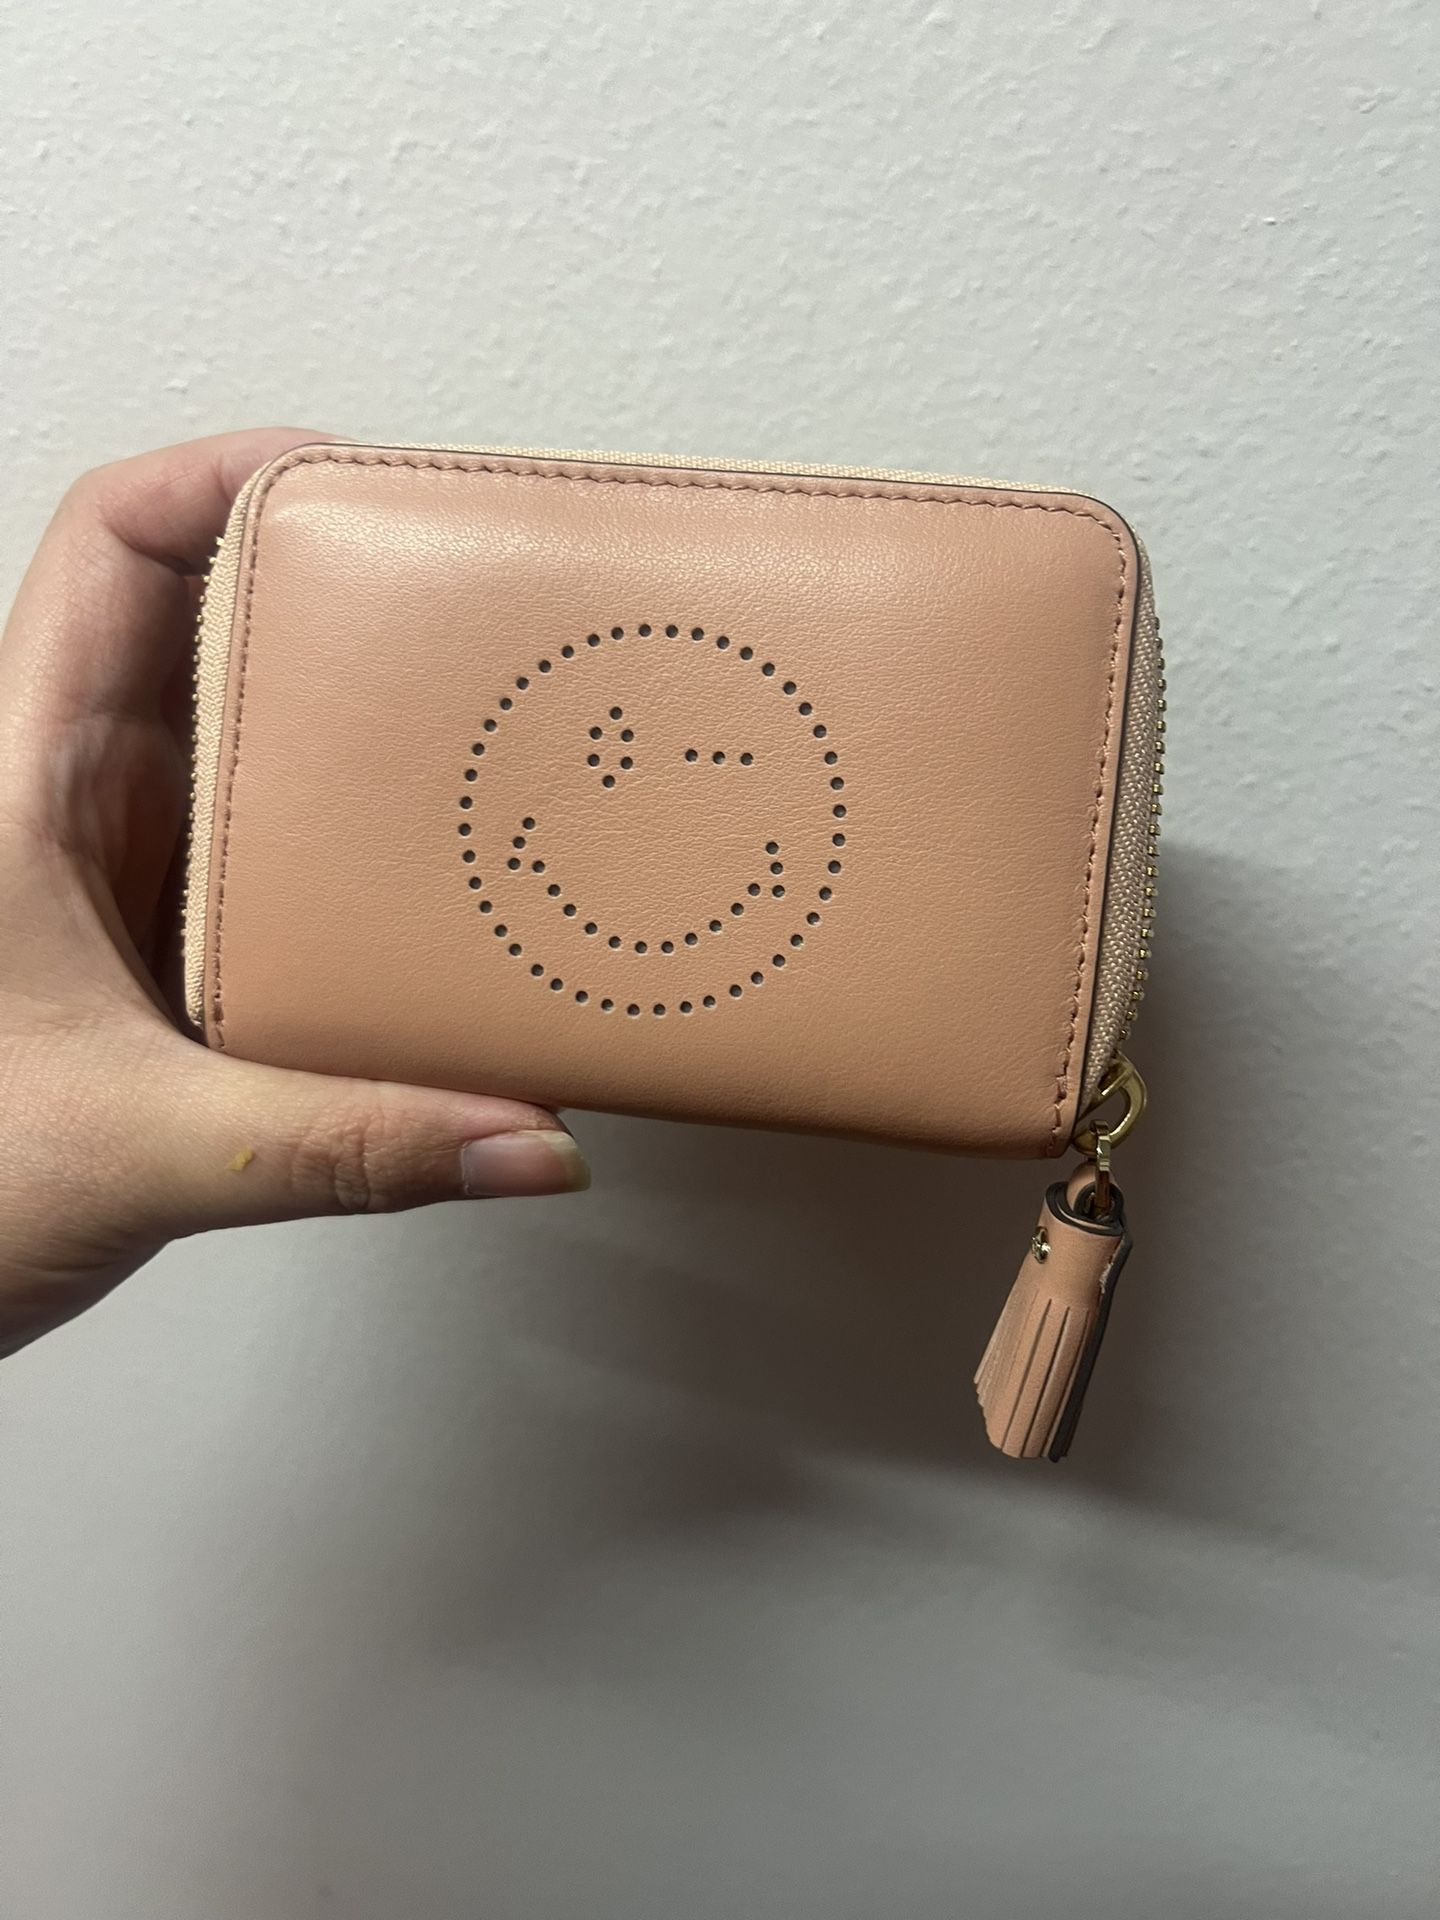 Anya Hindmarch Smiley Powder Pink Small Zip Round Leather Wallet 9*11*2.5 Cm